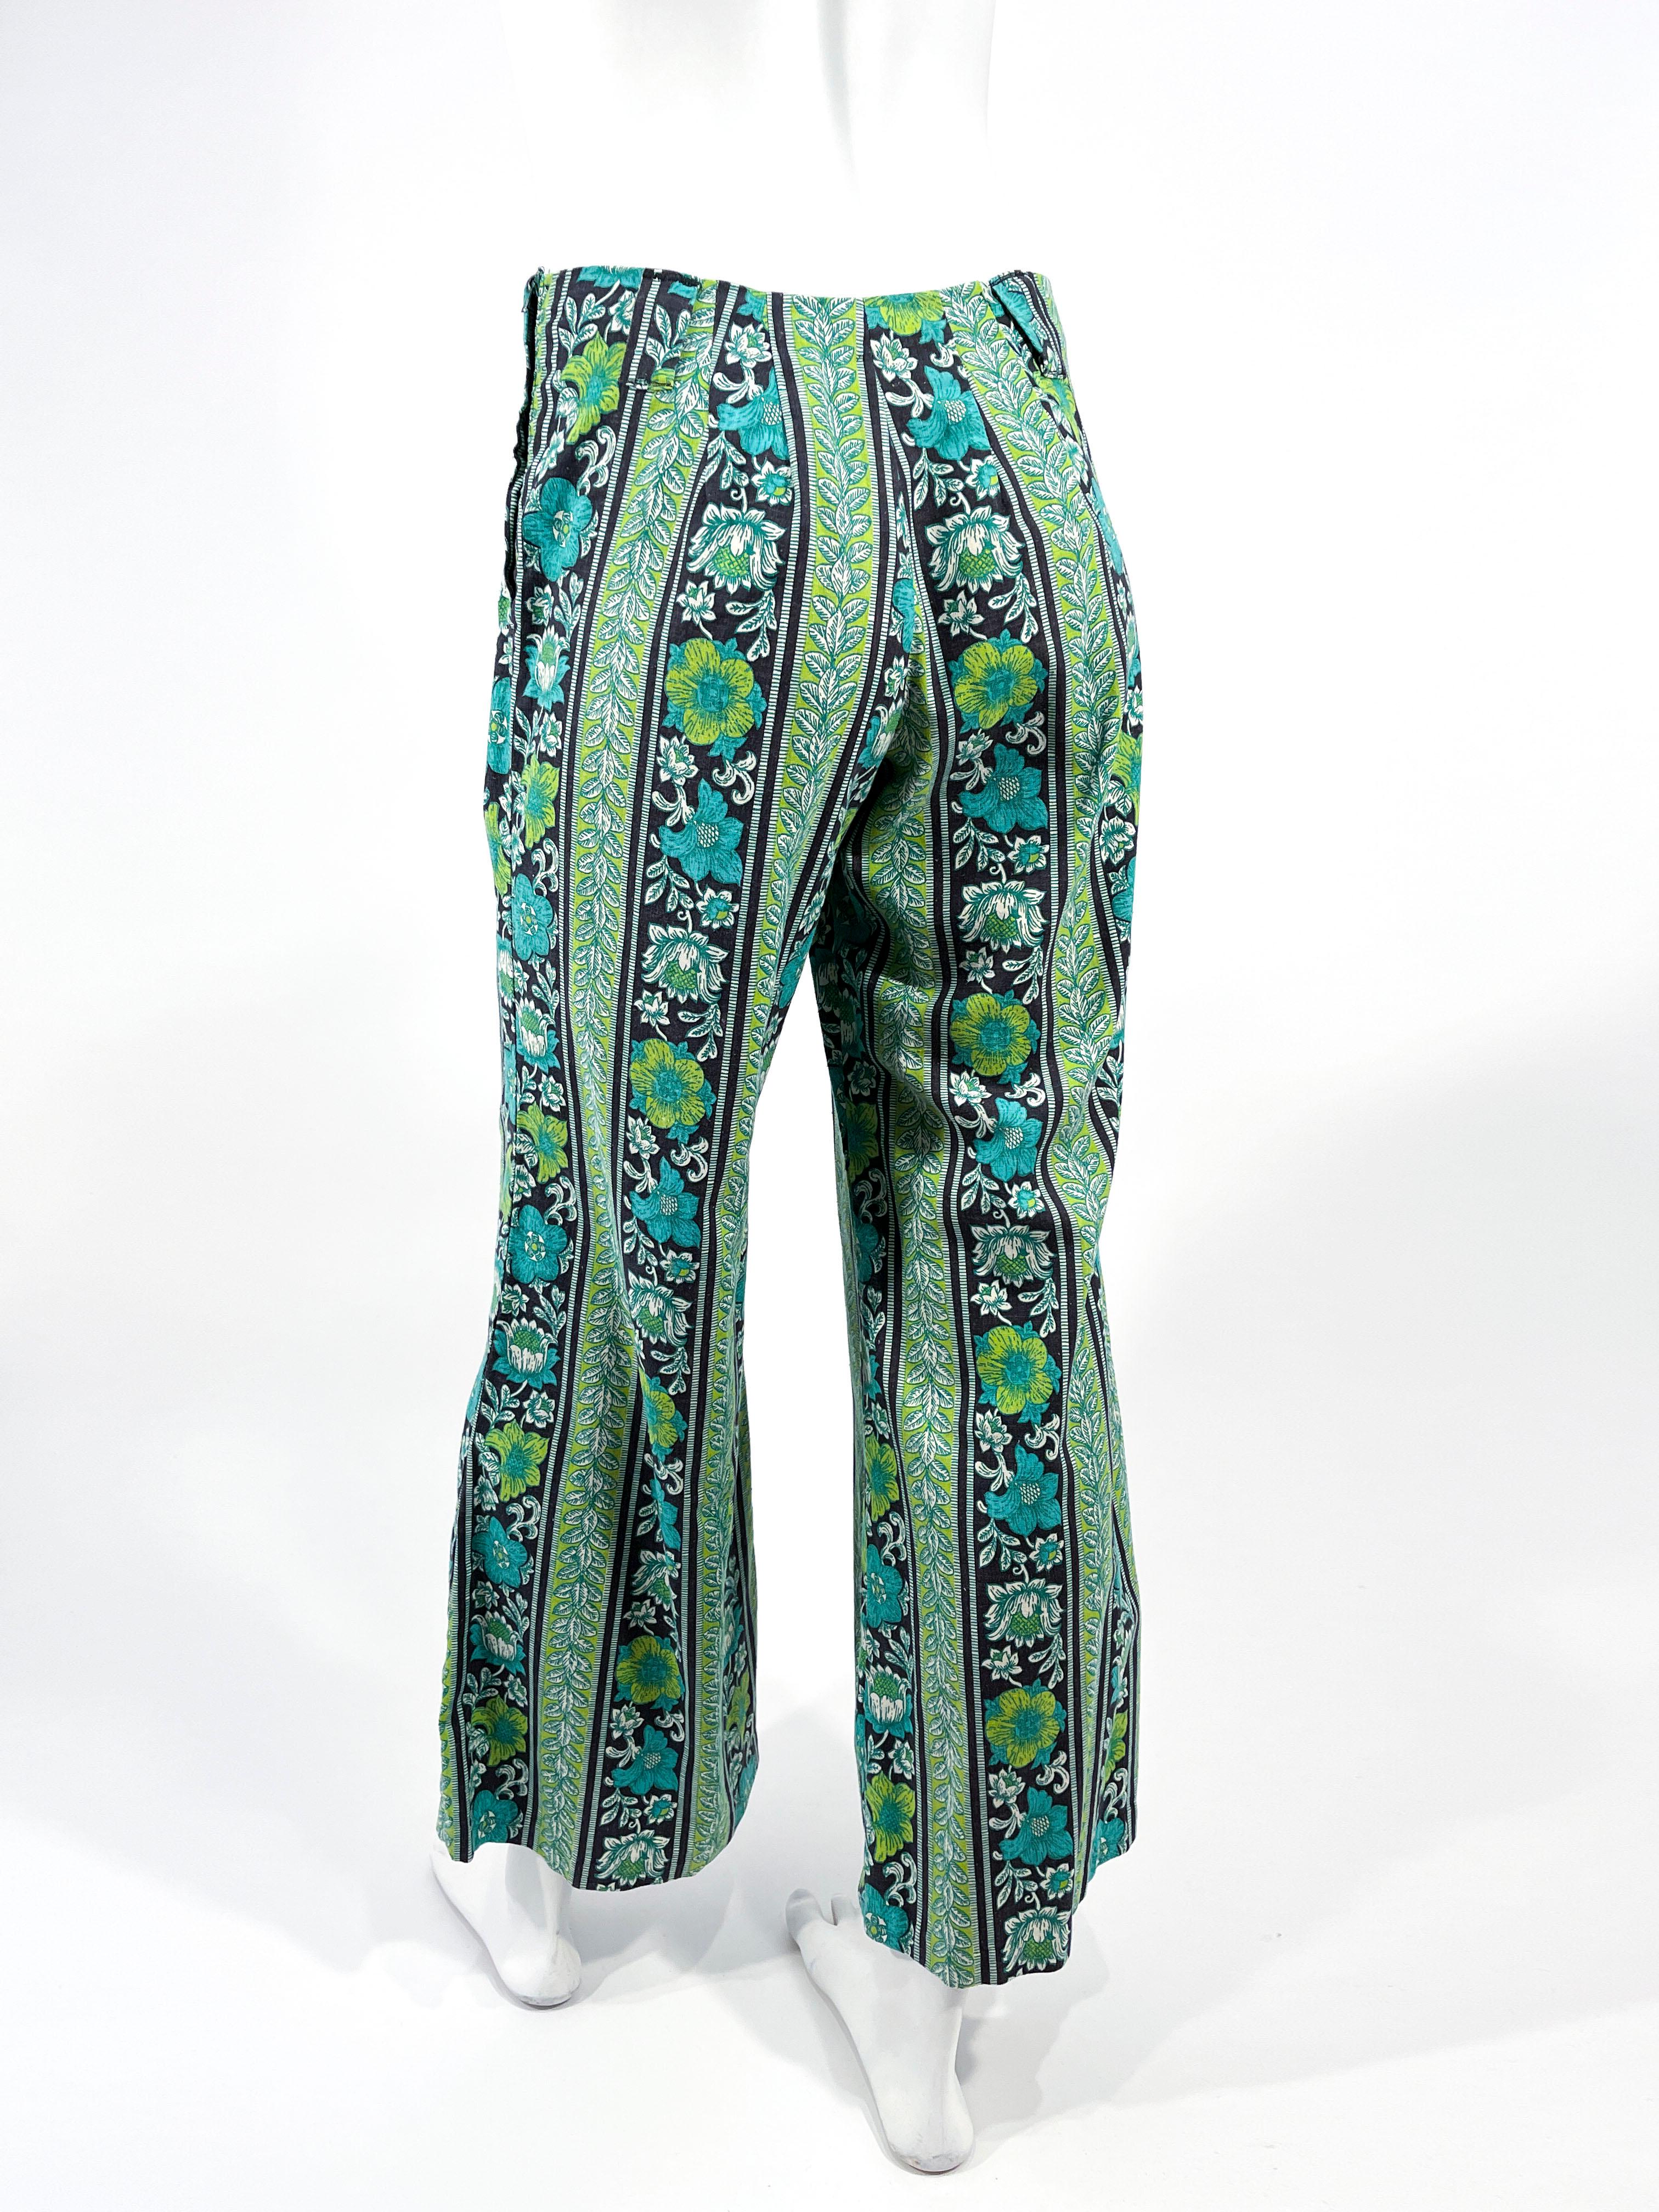 Women's 1960s Psychedelic Printed Flared Hip Hugger Pants For Sale